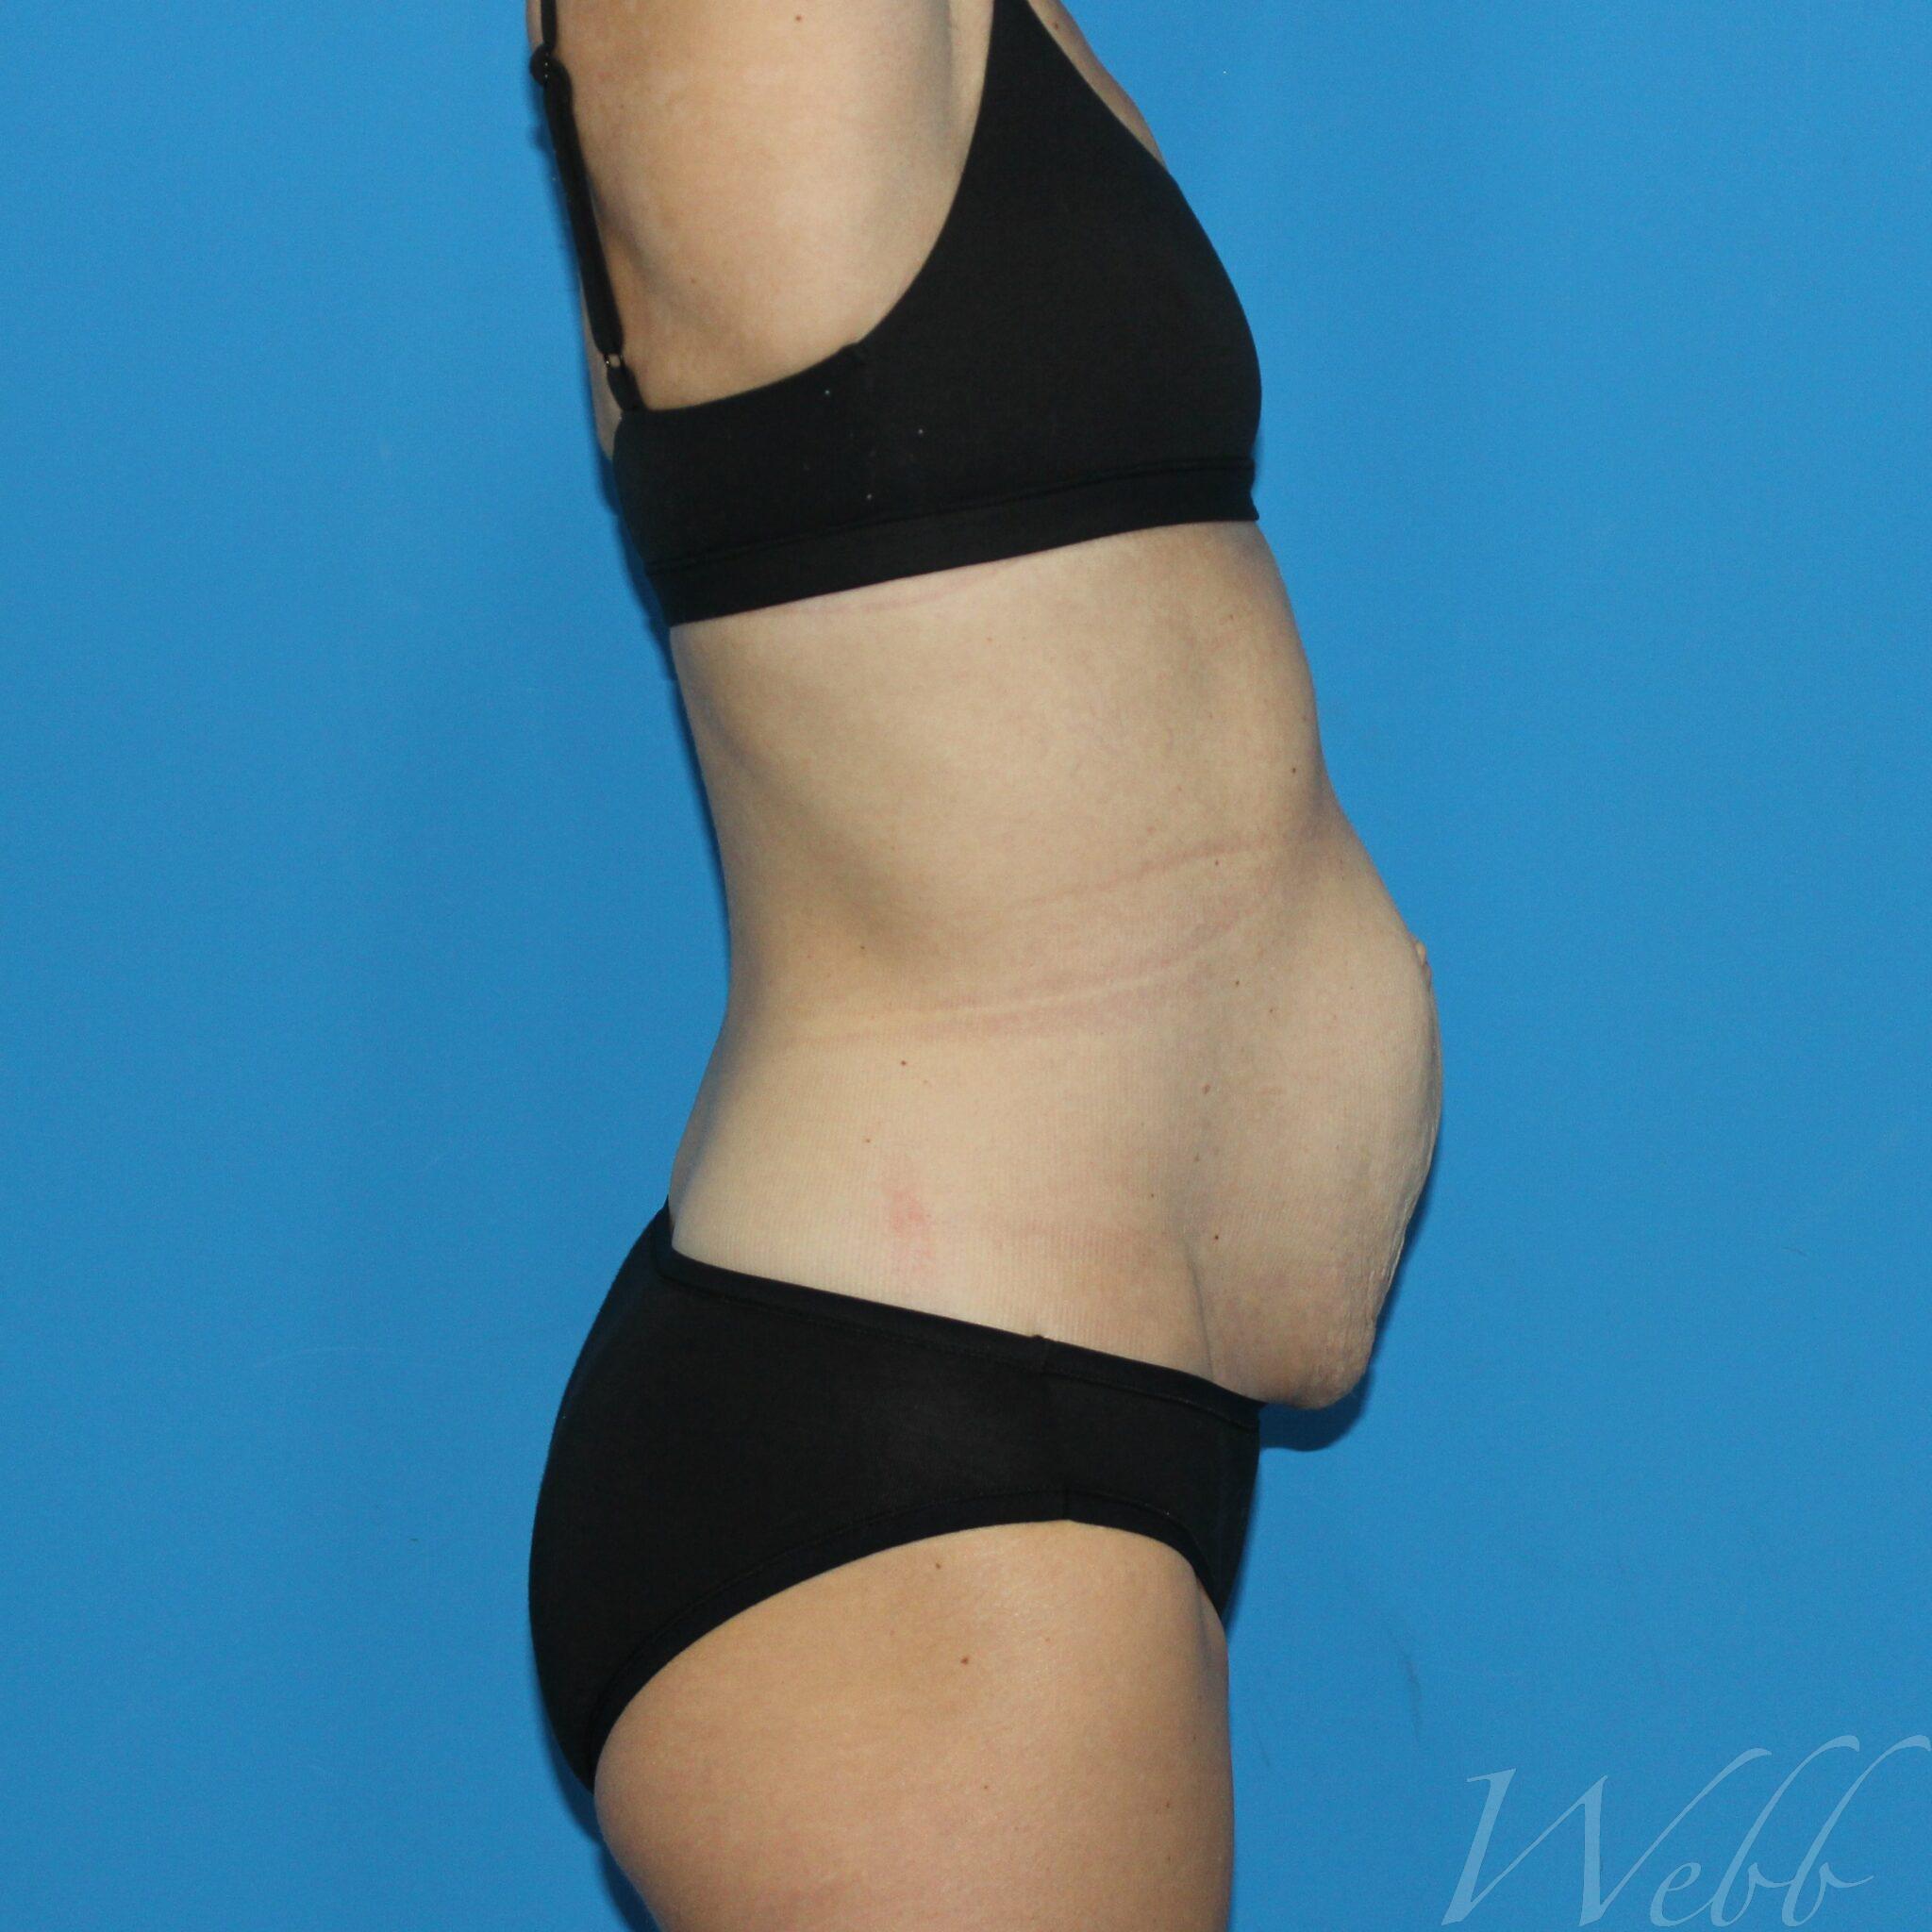 A 40-year-old Woman In Underwear With Sagging Breasts, Overweight